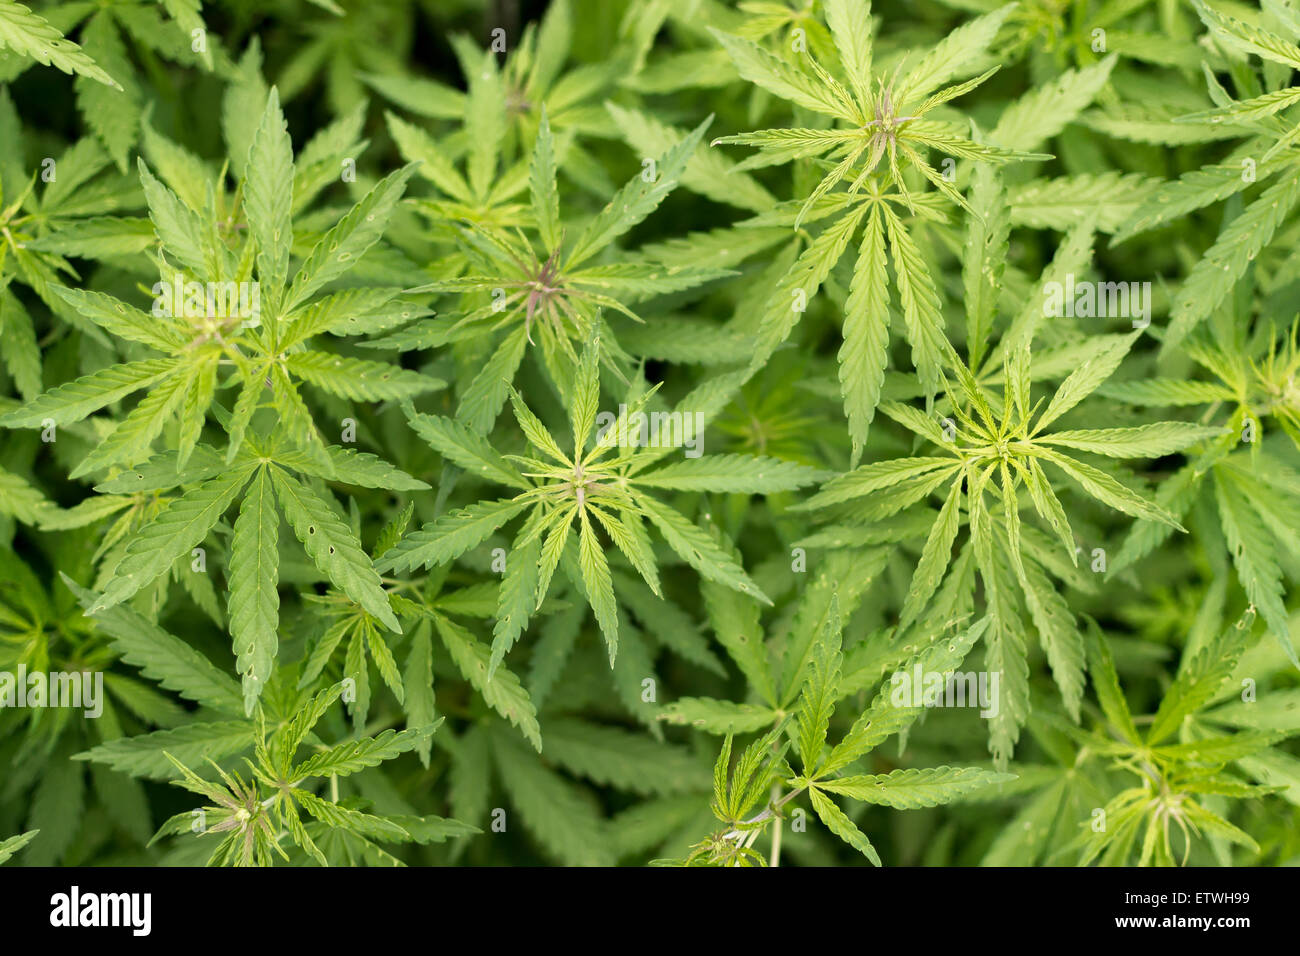 https://c8.alamy.com/comp/ETWH99/rows-of-wild-uncultivated-cannabis-hemp-plant-growing-free-in-the-ETWH99.jpg